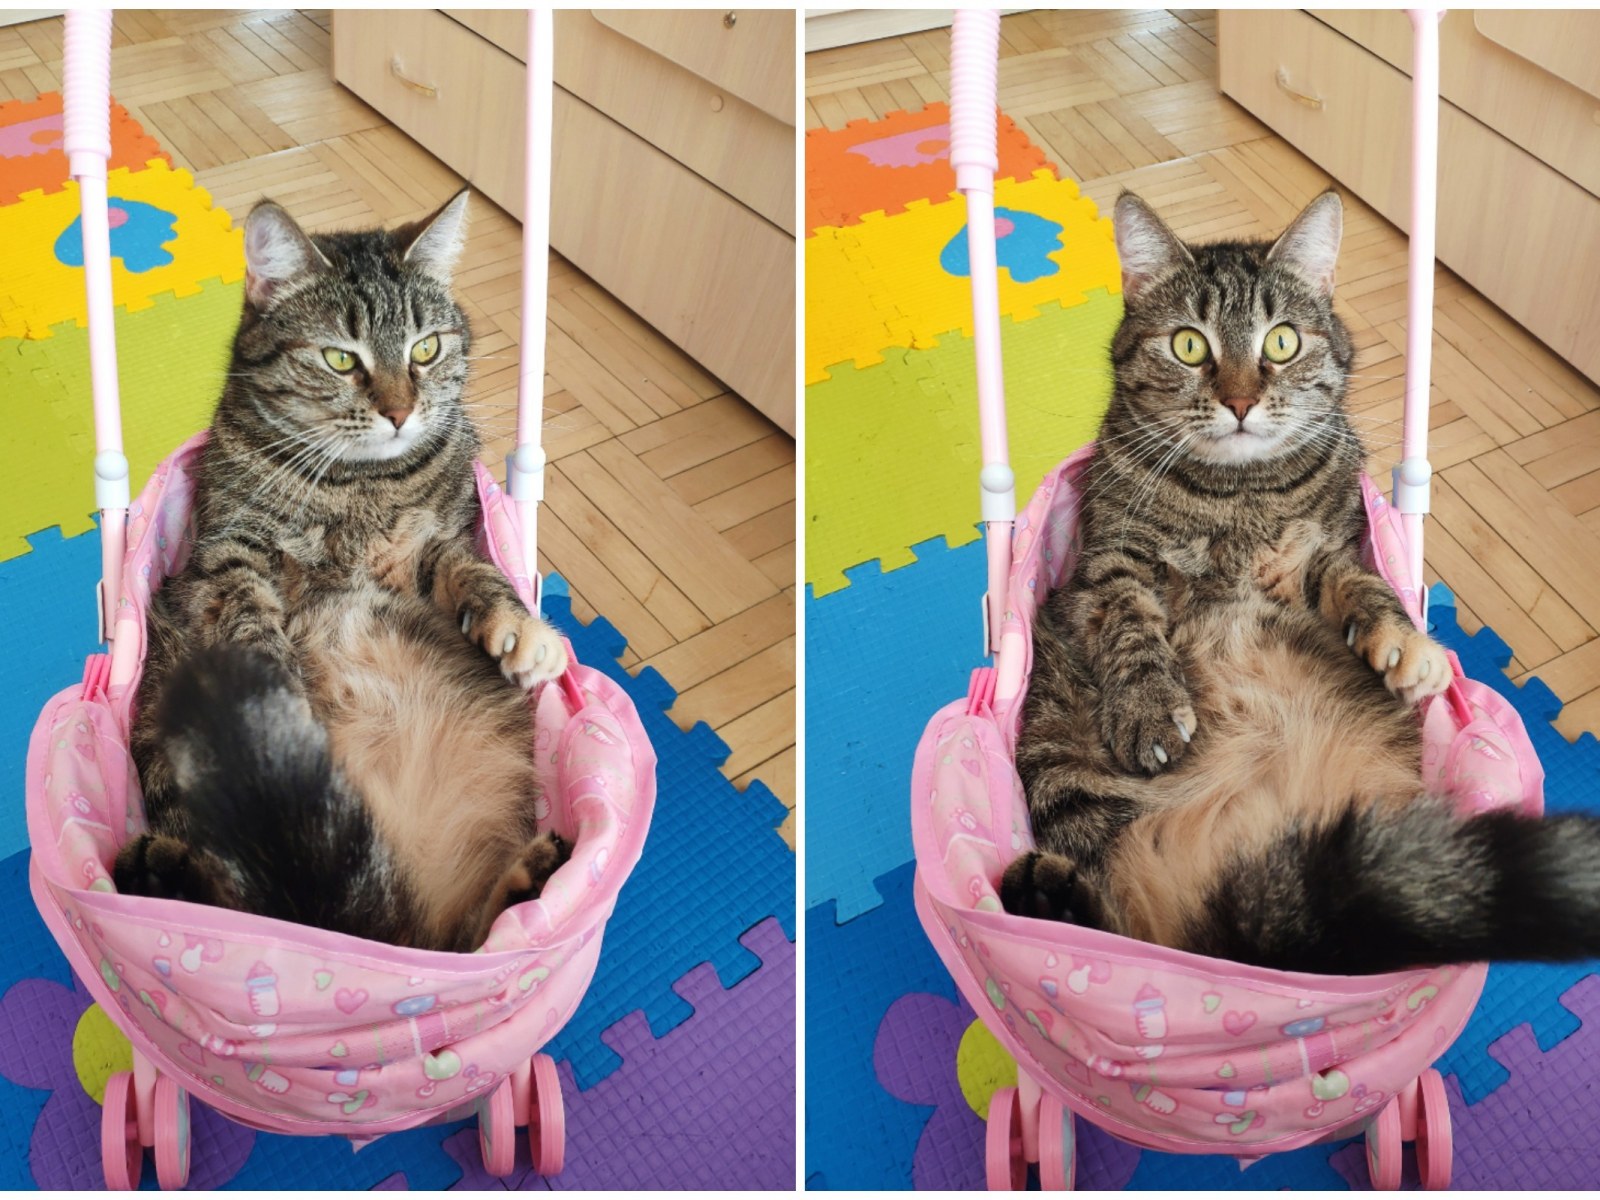 Chonky' Cat Sits Like a Human in Baby Bouncer After Claiming Toy As His Own